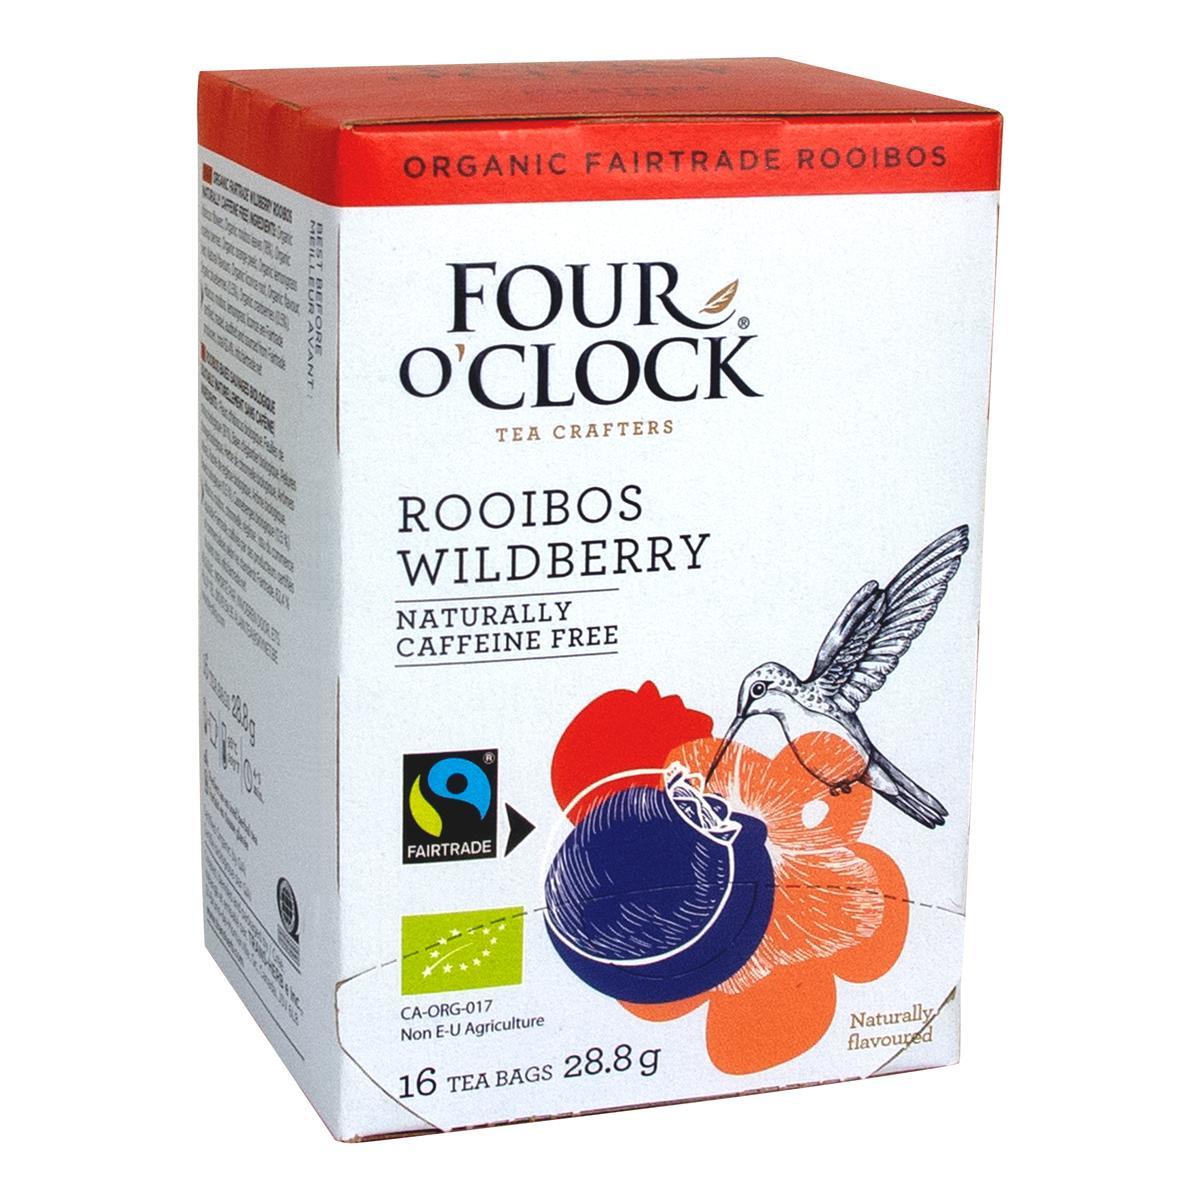 ROOIBOS WILDBERRY